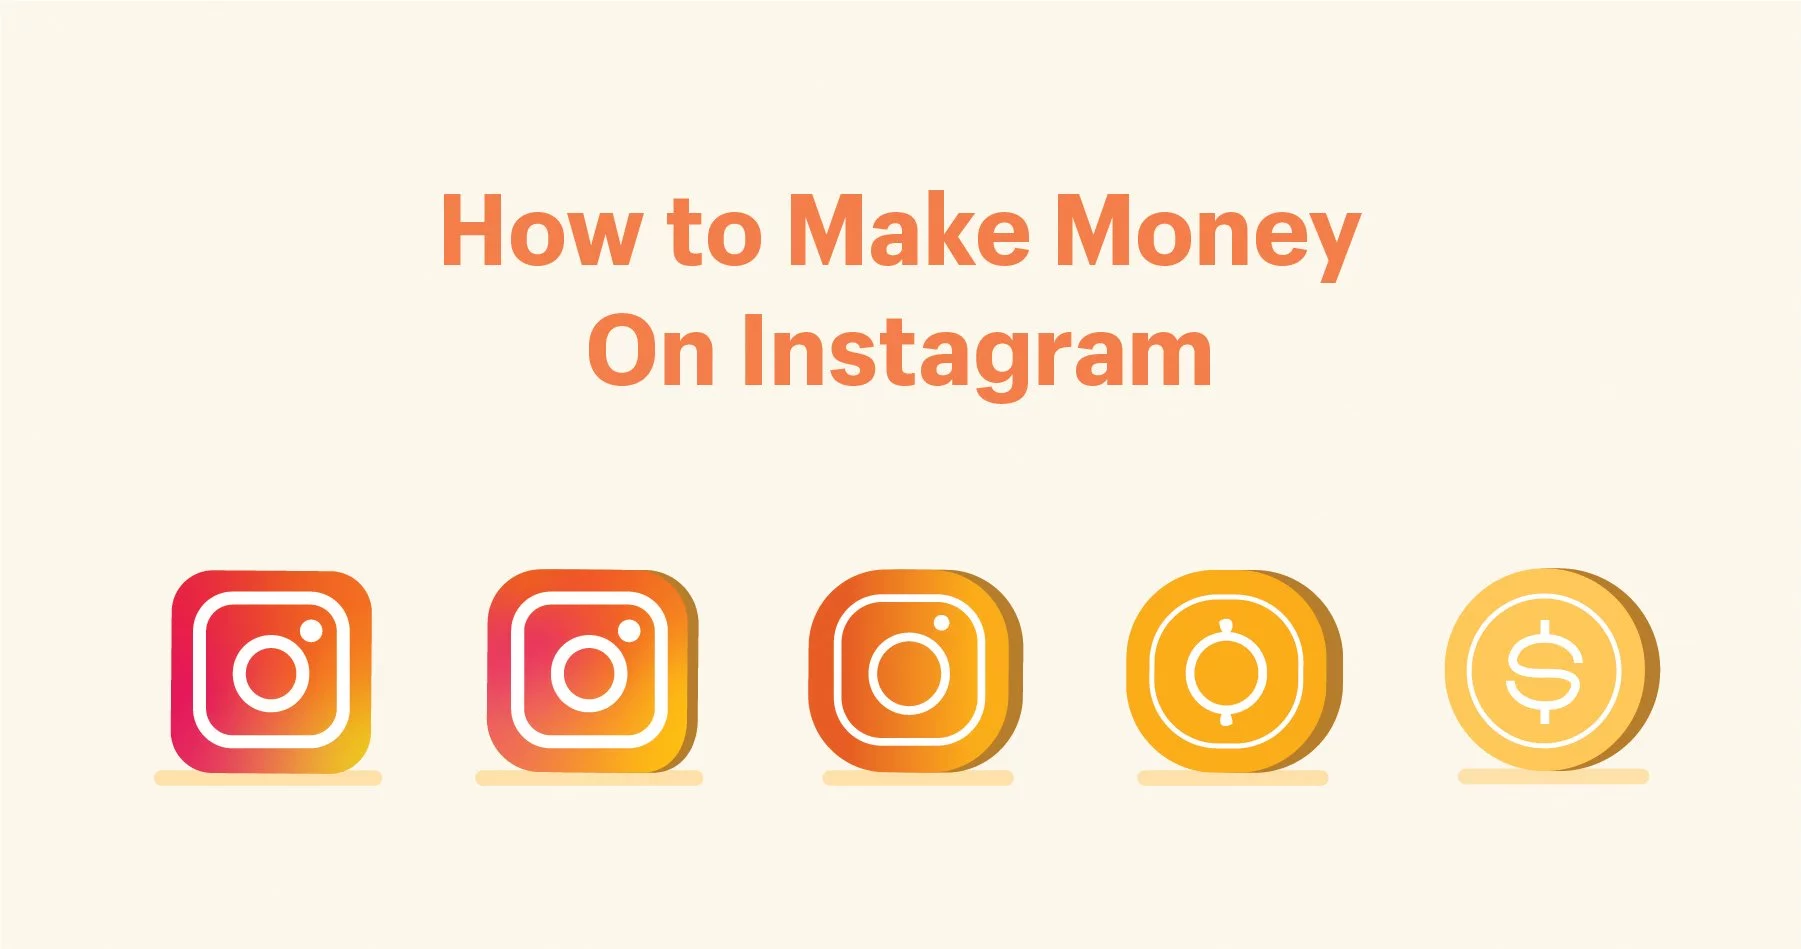 4 Best Ways to Make Money On Instagram With 500 Followers